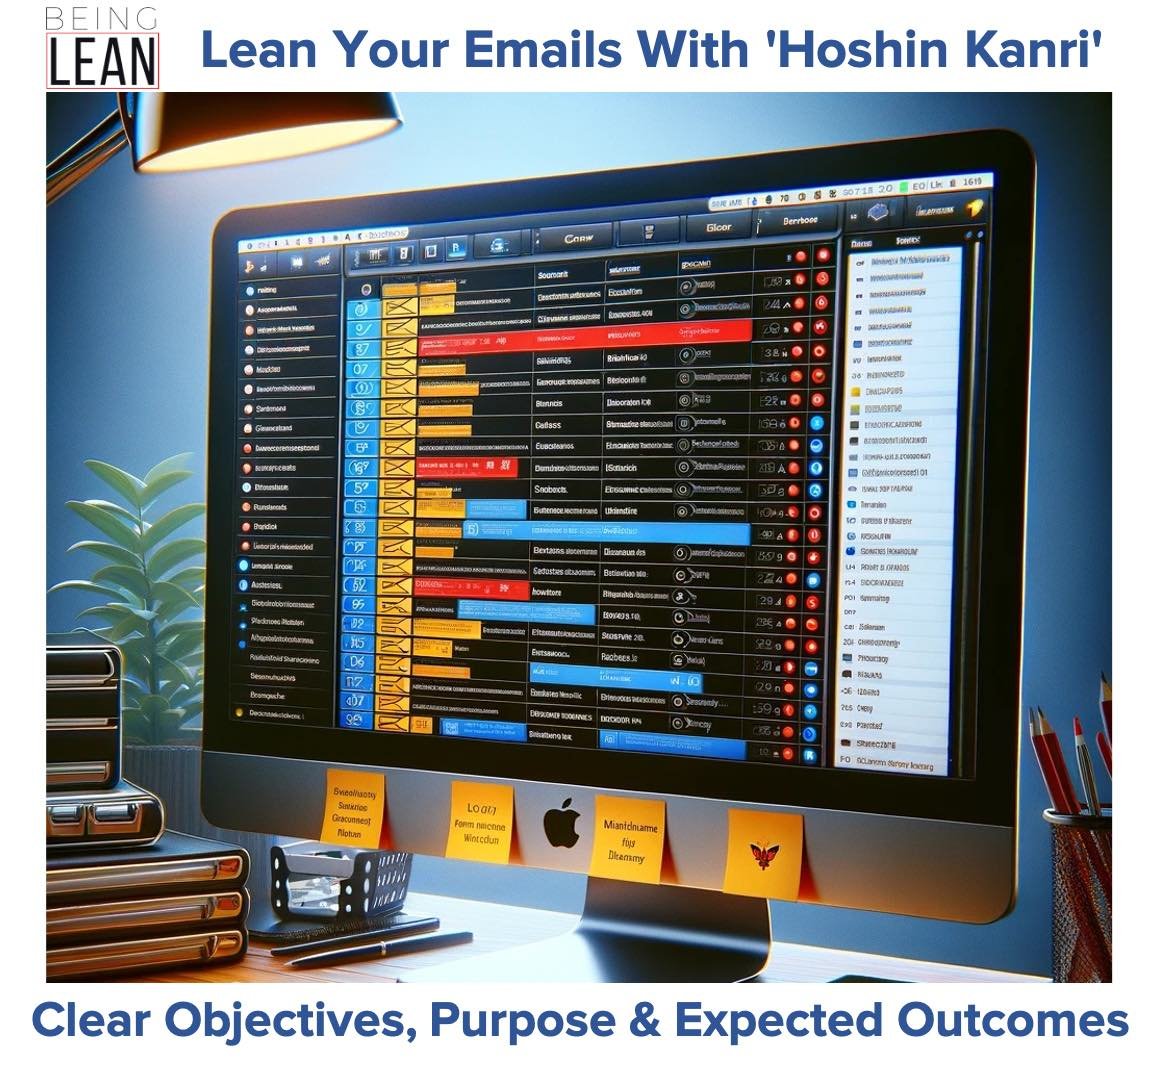 BEINGLEAN TIP: Endless Email Threads? Use 'Hoshin Kanri', the lean strategy deployment tool, applied in a micro way by setting clear objectives and communication plans in your emails. Ensure that email communication is focused, effective, and aligned